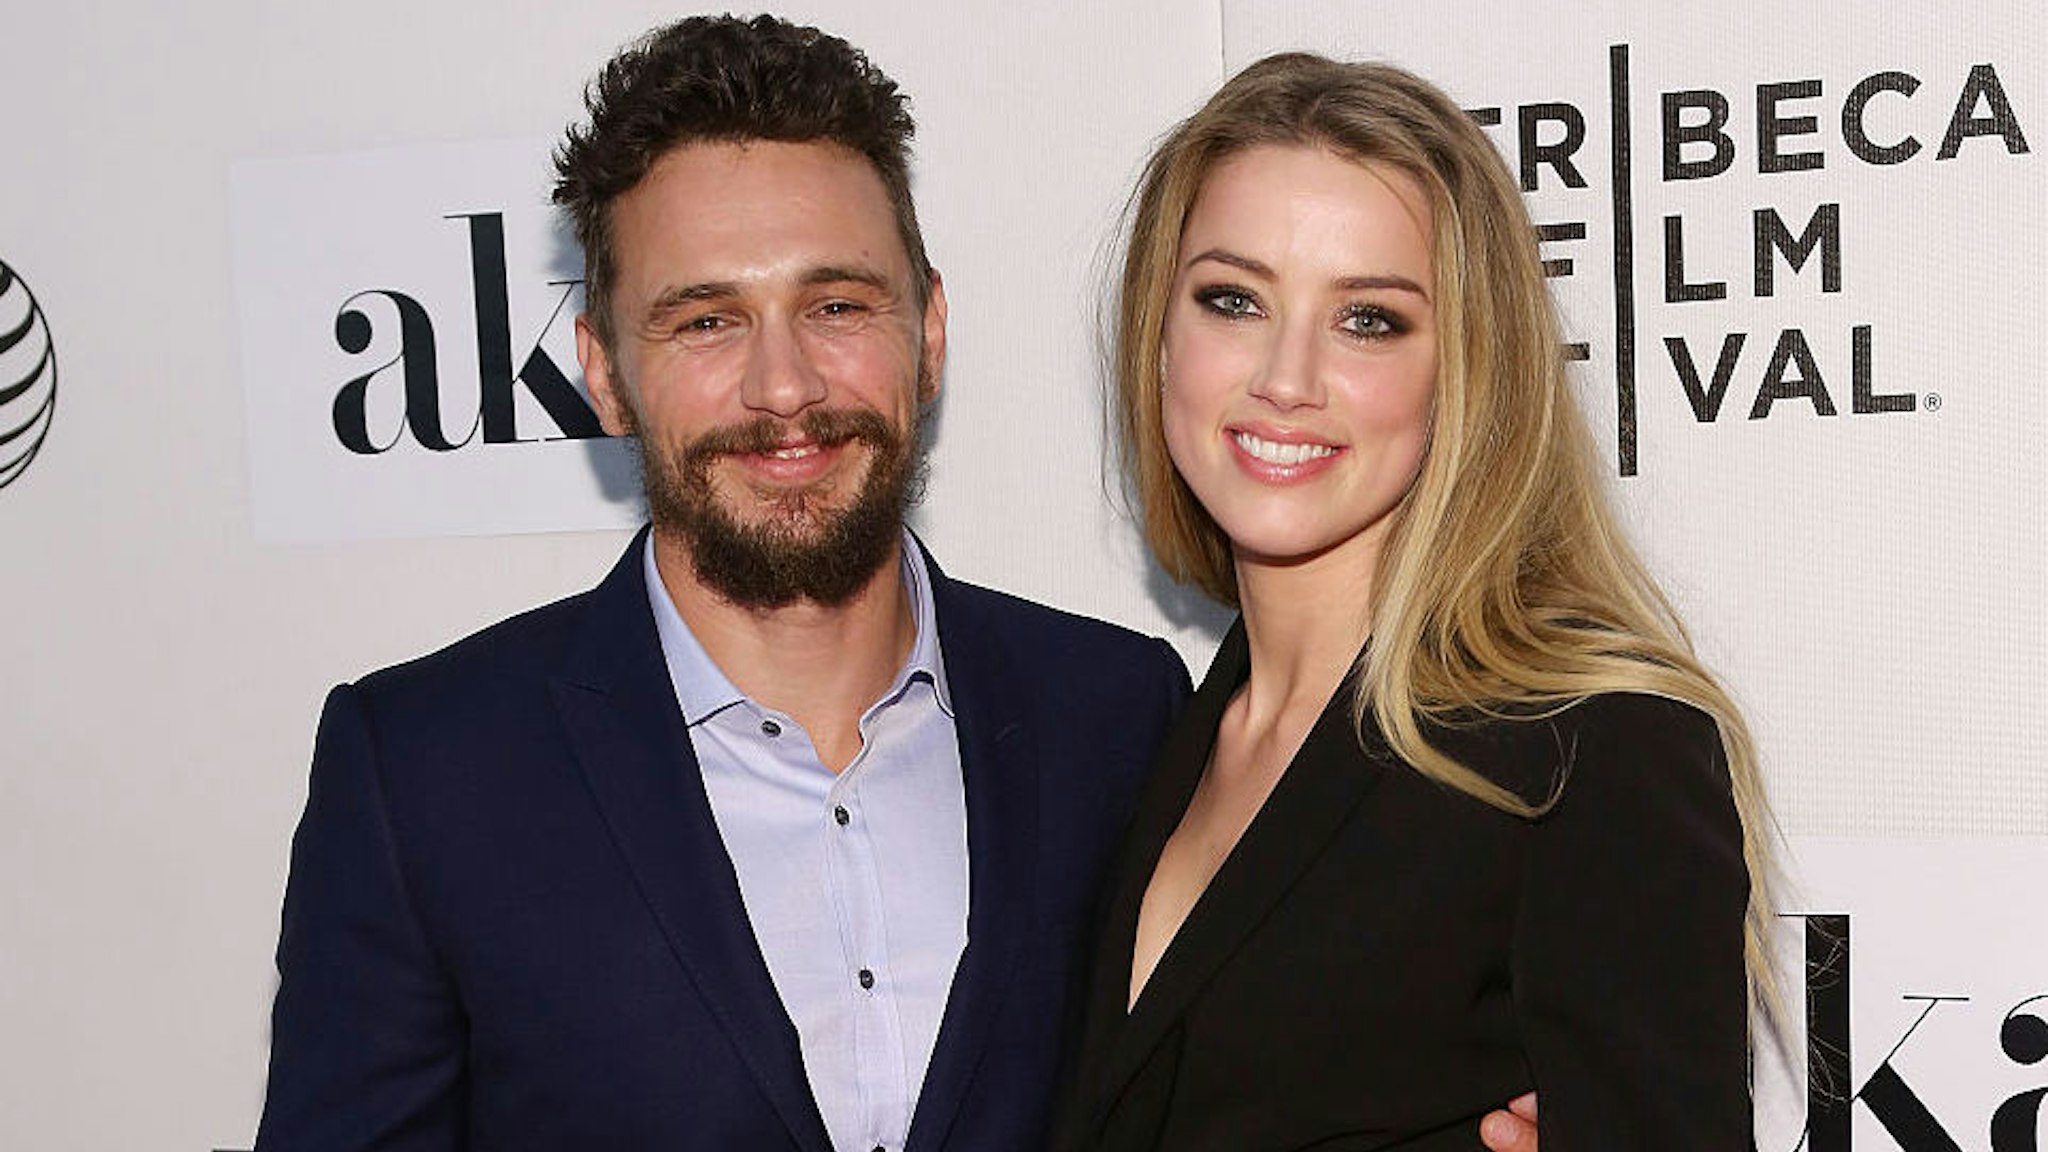 James Franco and Amber Heard attend the premiere of "The Adderall Diaries" at the 2015 Tribeca Film Festival at BMCC Tribeca PAC on April 16, 2015 in New York City.